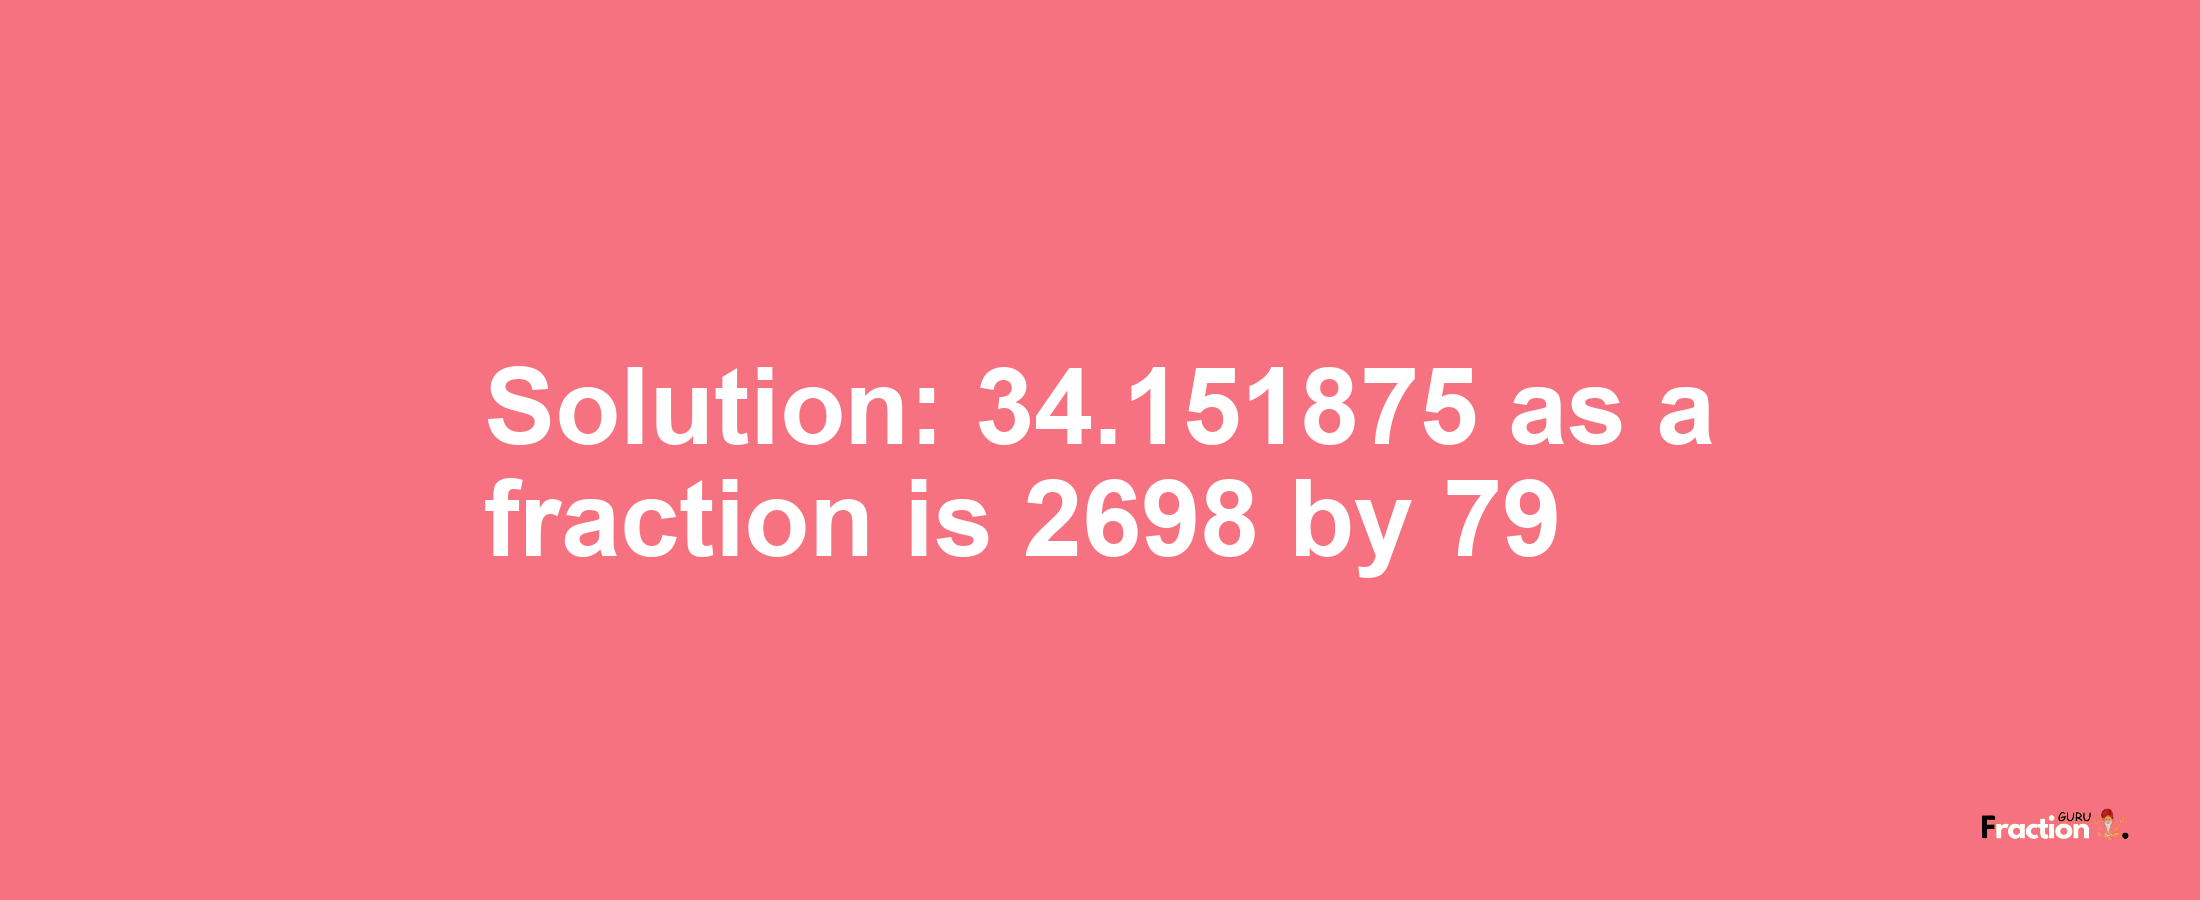 Solution:34.151875 as a fraction is 2698/79